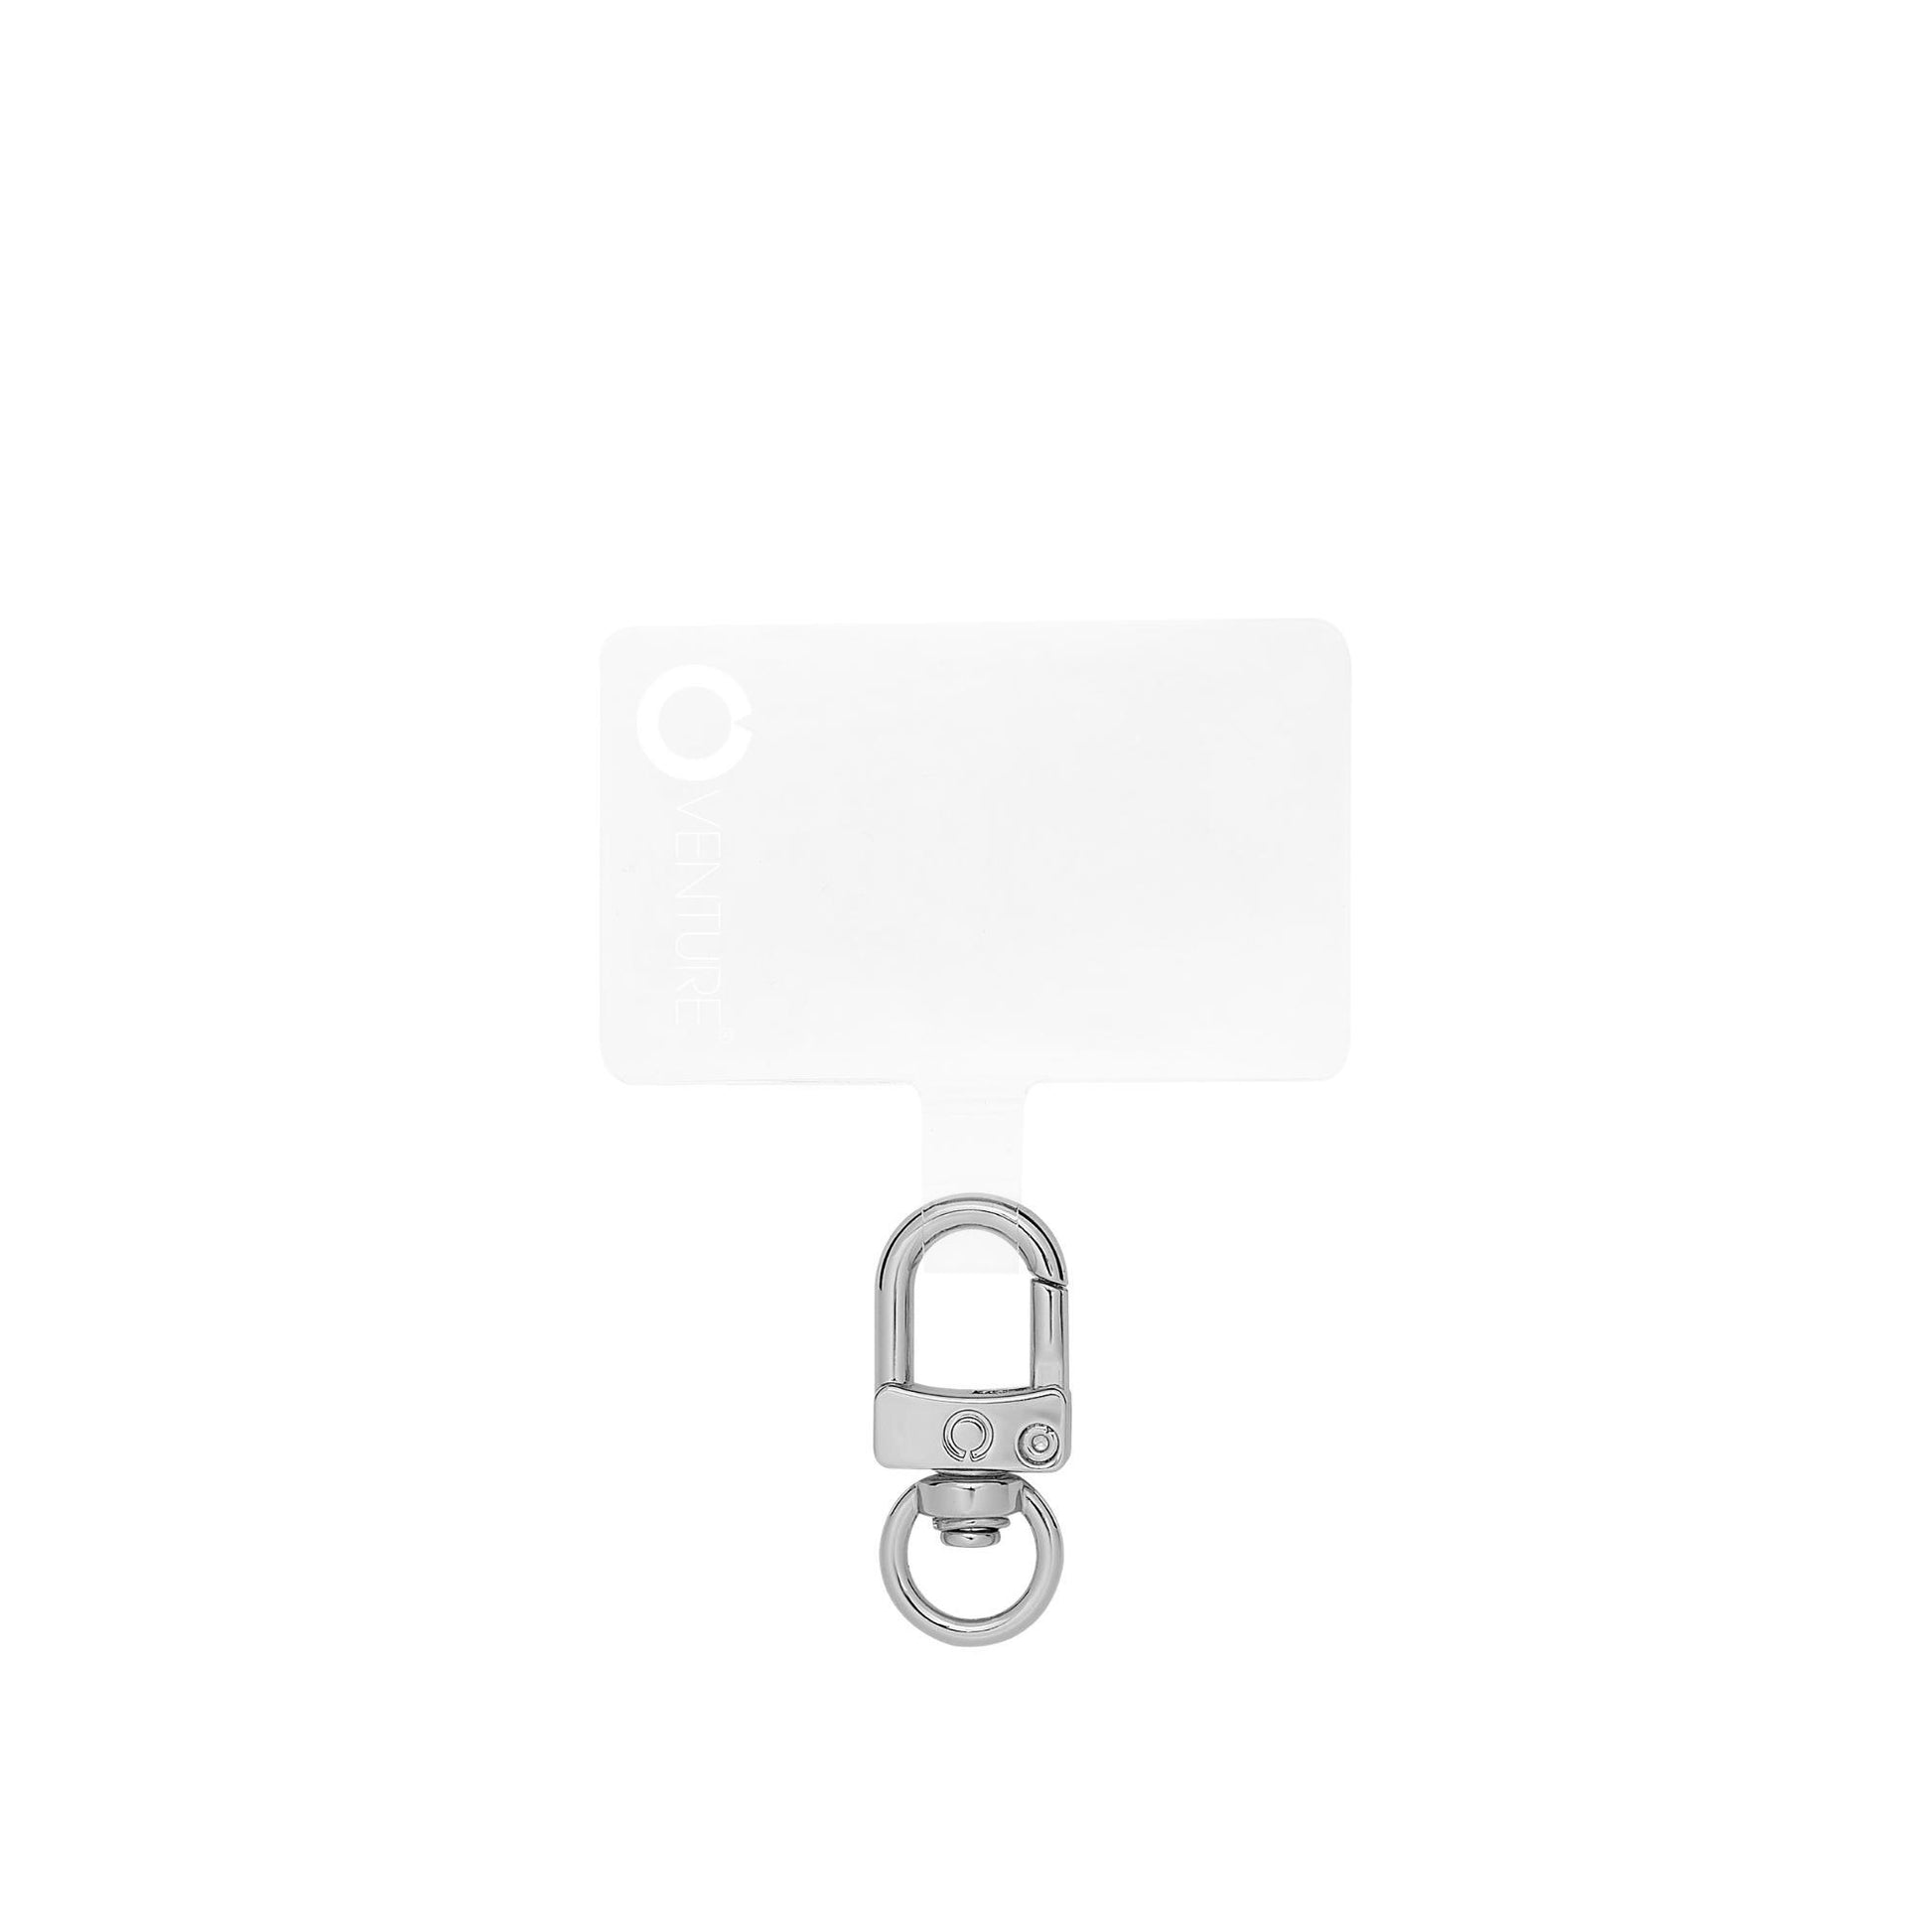 Quicksilver - The Hook Me Up™ Universal Phone Connector - Oventure. This is the clear tab that connects to the phone.